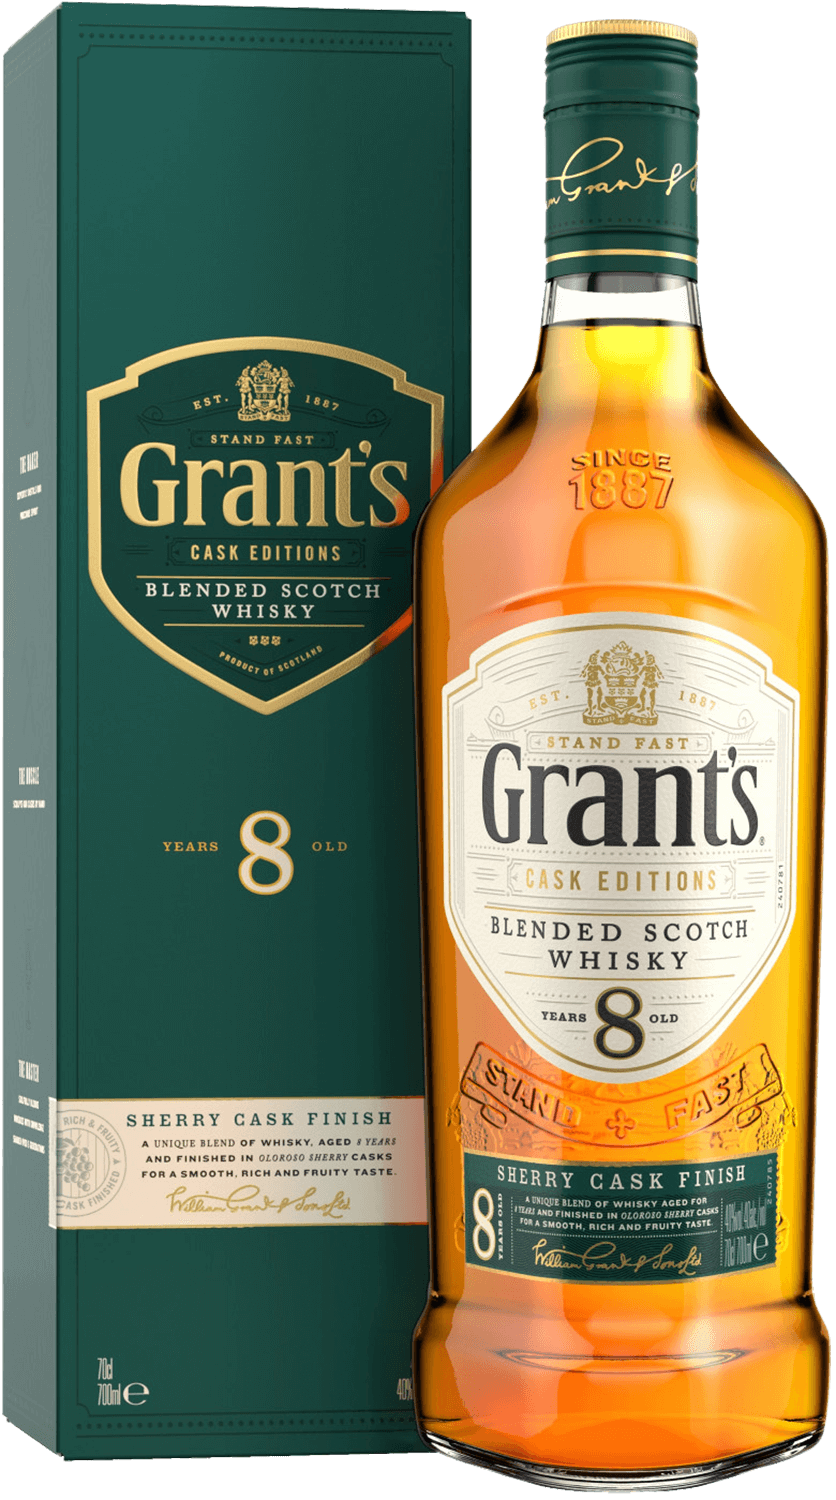 Grant's Sherry Cask Finish 8 y.o. Blended Scotch Whisky (gift box) angus dundee cask strength blended grain scotch whisky 50 y o gift box